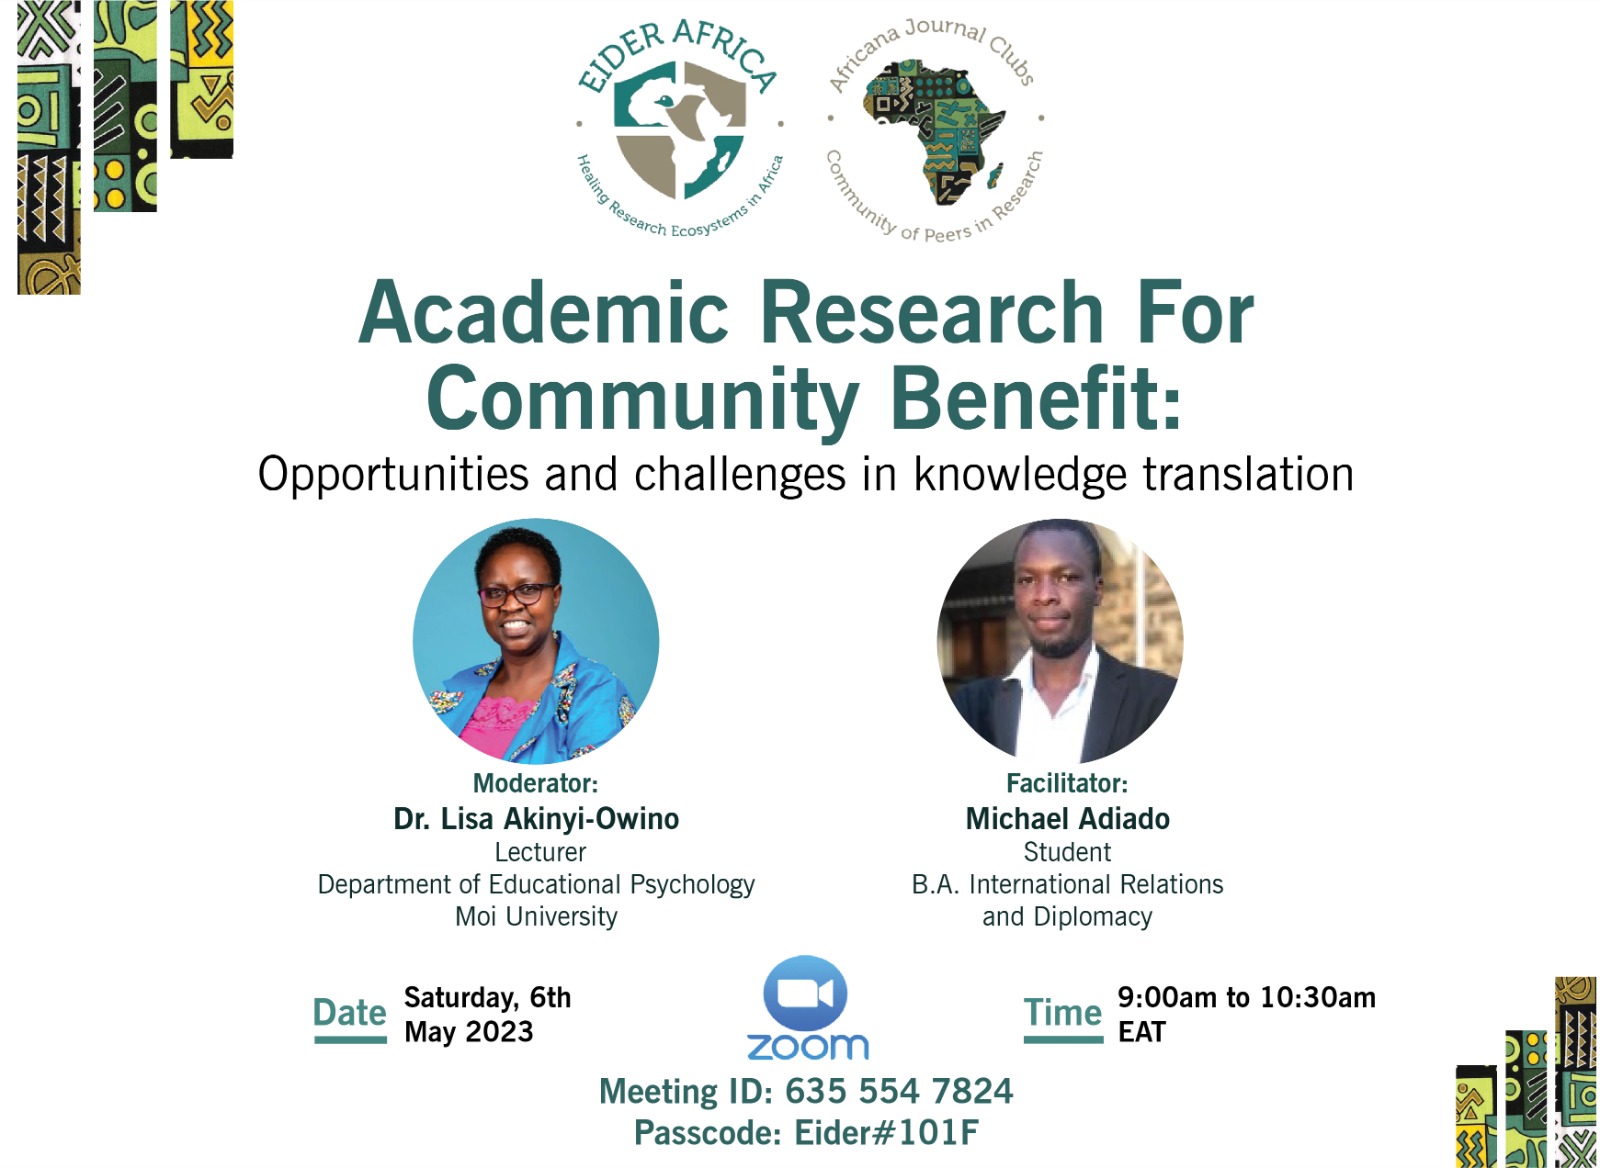 Academic Research for Community Benefit Opportunities and Challenges in Knowledge Translation